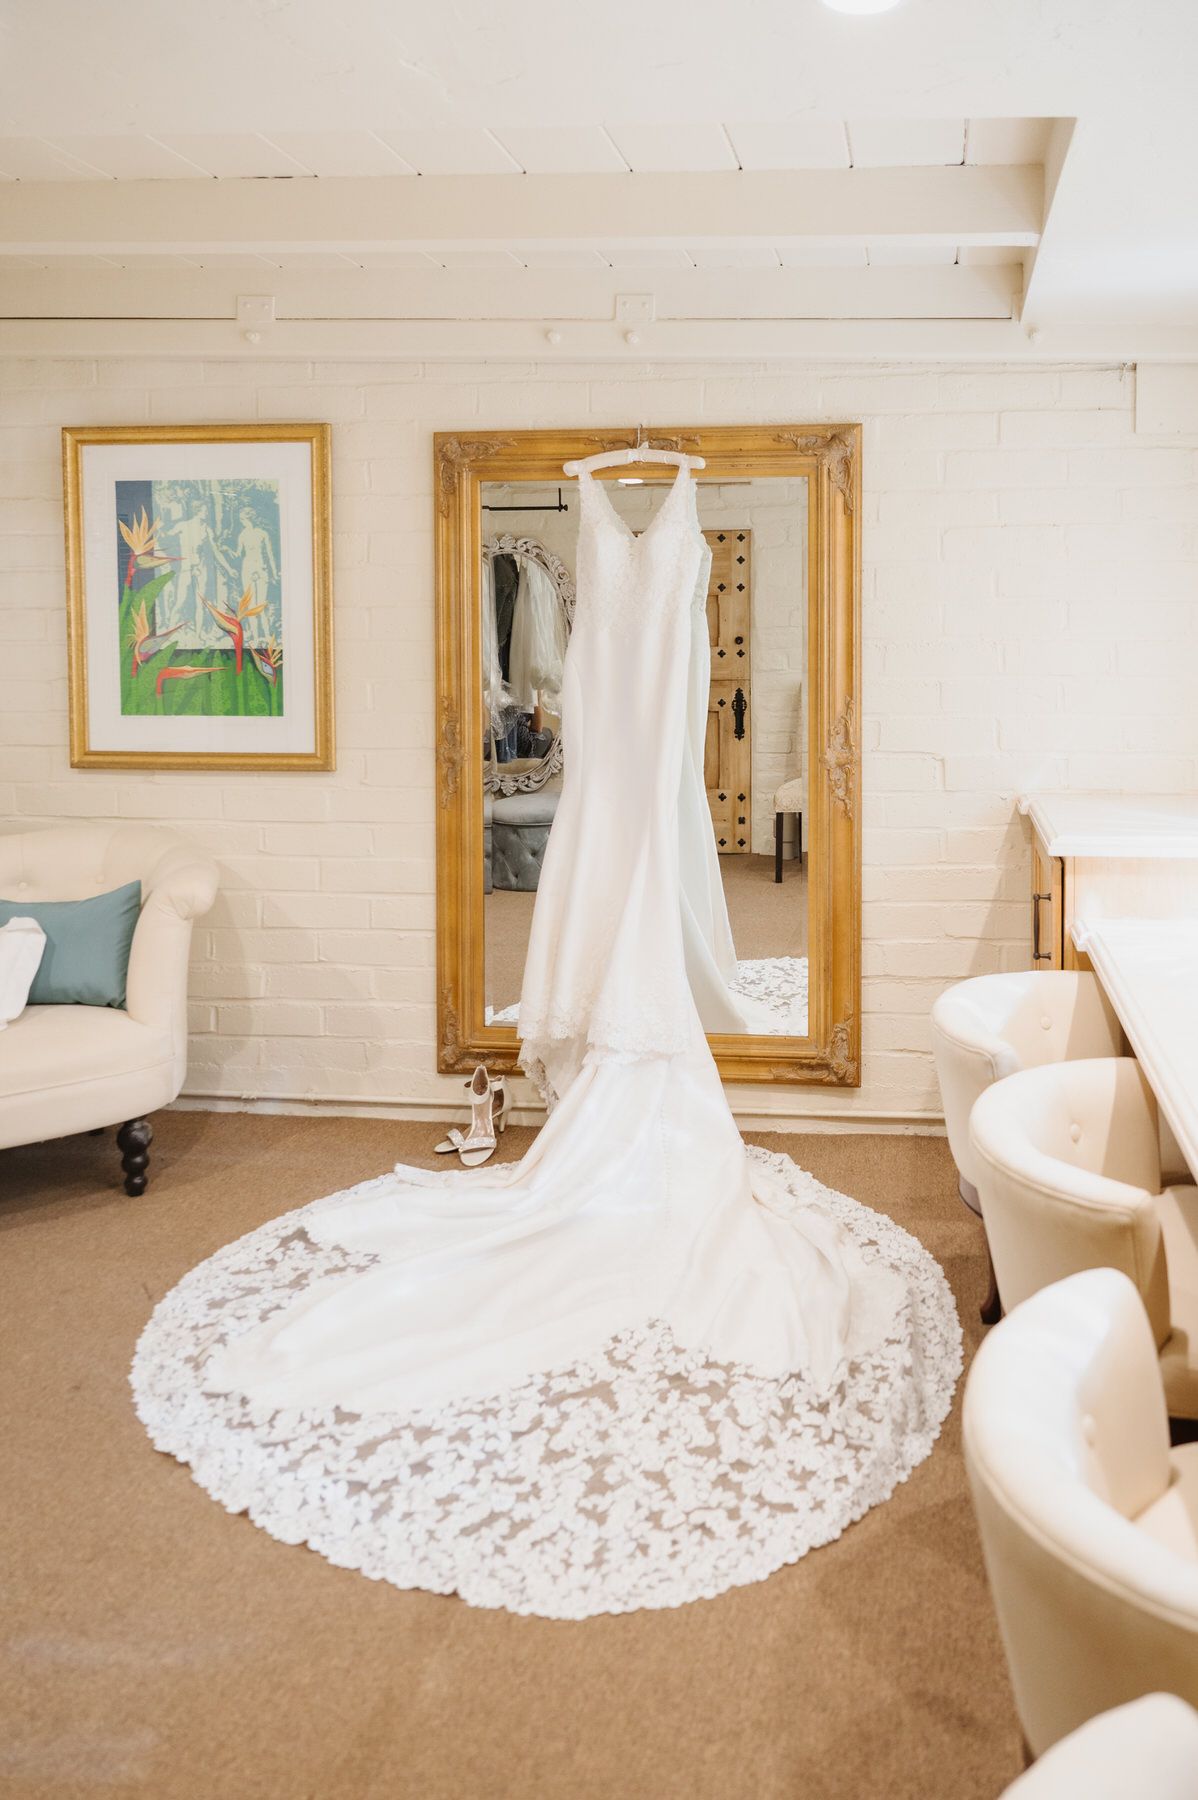 A wedding dress is hanging in front of a mirror in a room.